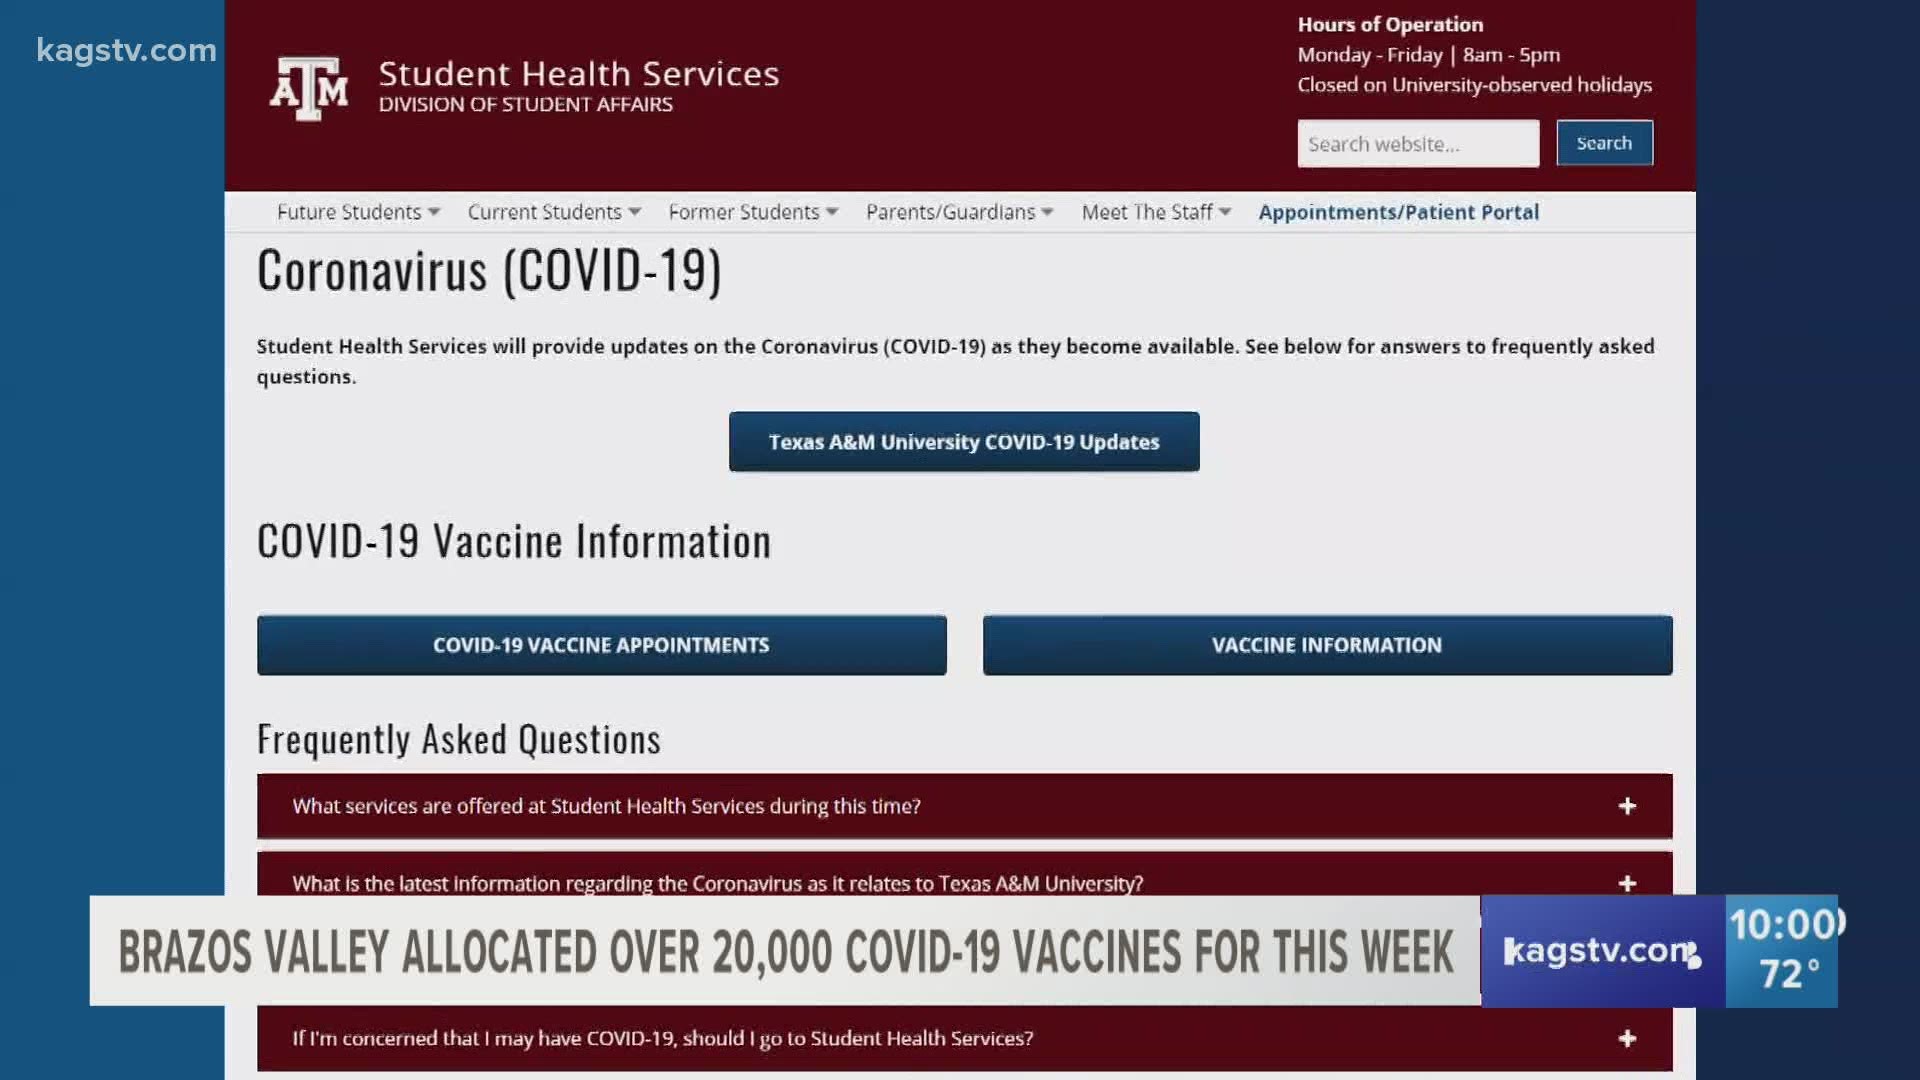 The Brazos Valley has been flooded with COVID-19 vaccines for this week, over 20,000 to be exact.